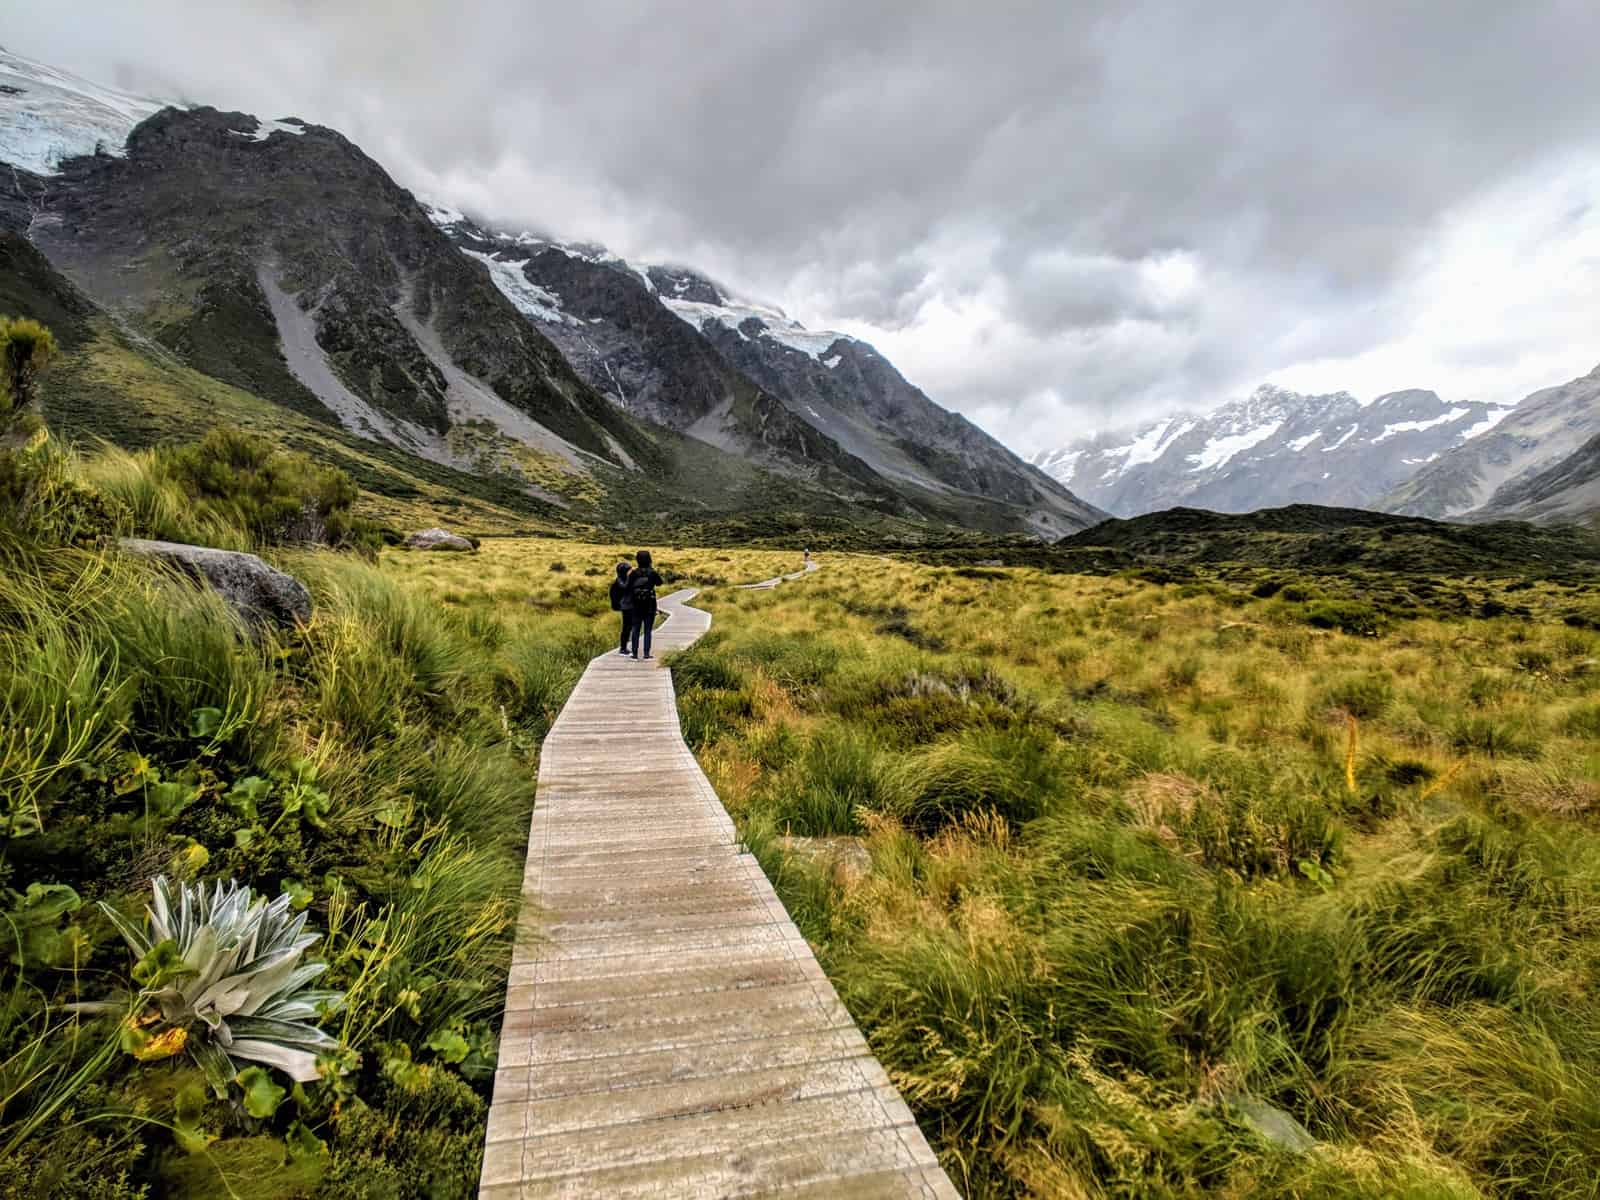 Hooker Valley walk is one of the best walking trails in New Zealand, no matter the weather